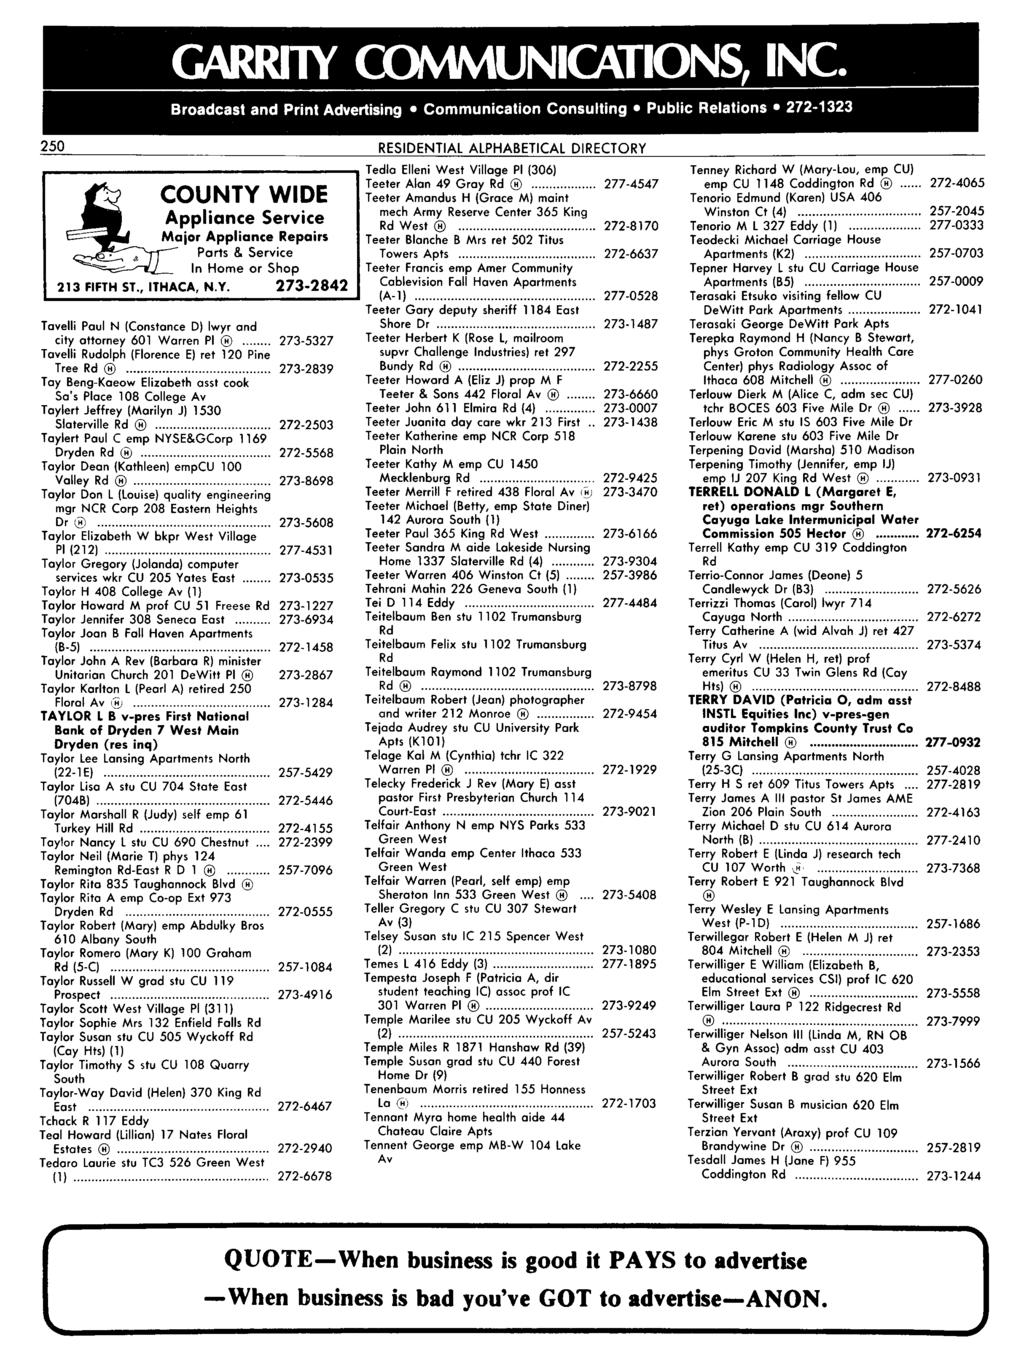 250 RESIDENTIAL ALPHABETICAL DIRECTORY...... Tedla Elleni West Village PI (306) WIDE Appliance Service Major Appliance Repairs jjcounty '" Ports & Service ~ In Home or Shop 213 FIFTH ST., ITHACA, N.Y. 273-2842 Tavelli Paul N (Constance D) Iwyr and city attorney 601 Warren PI.